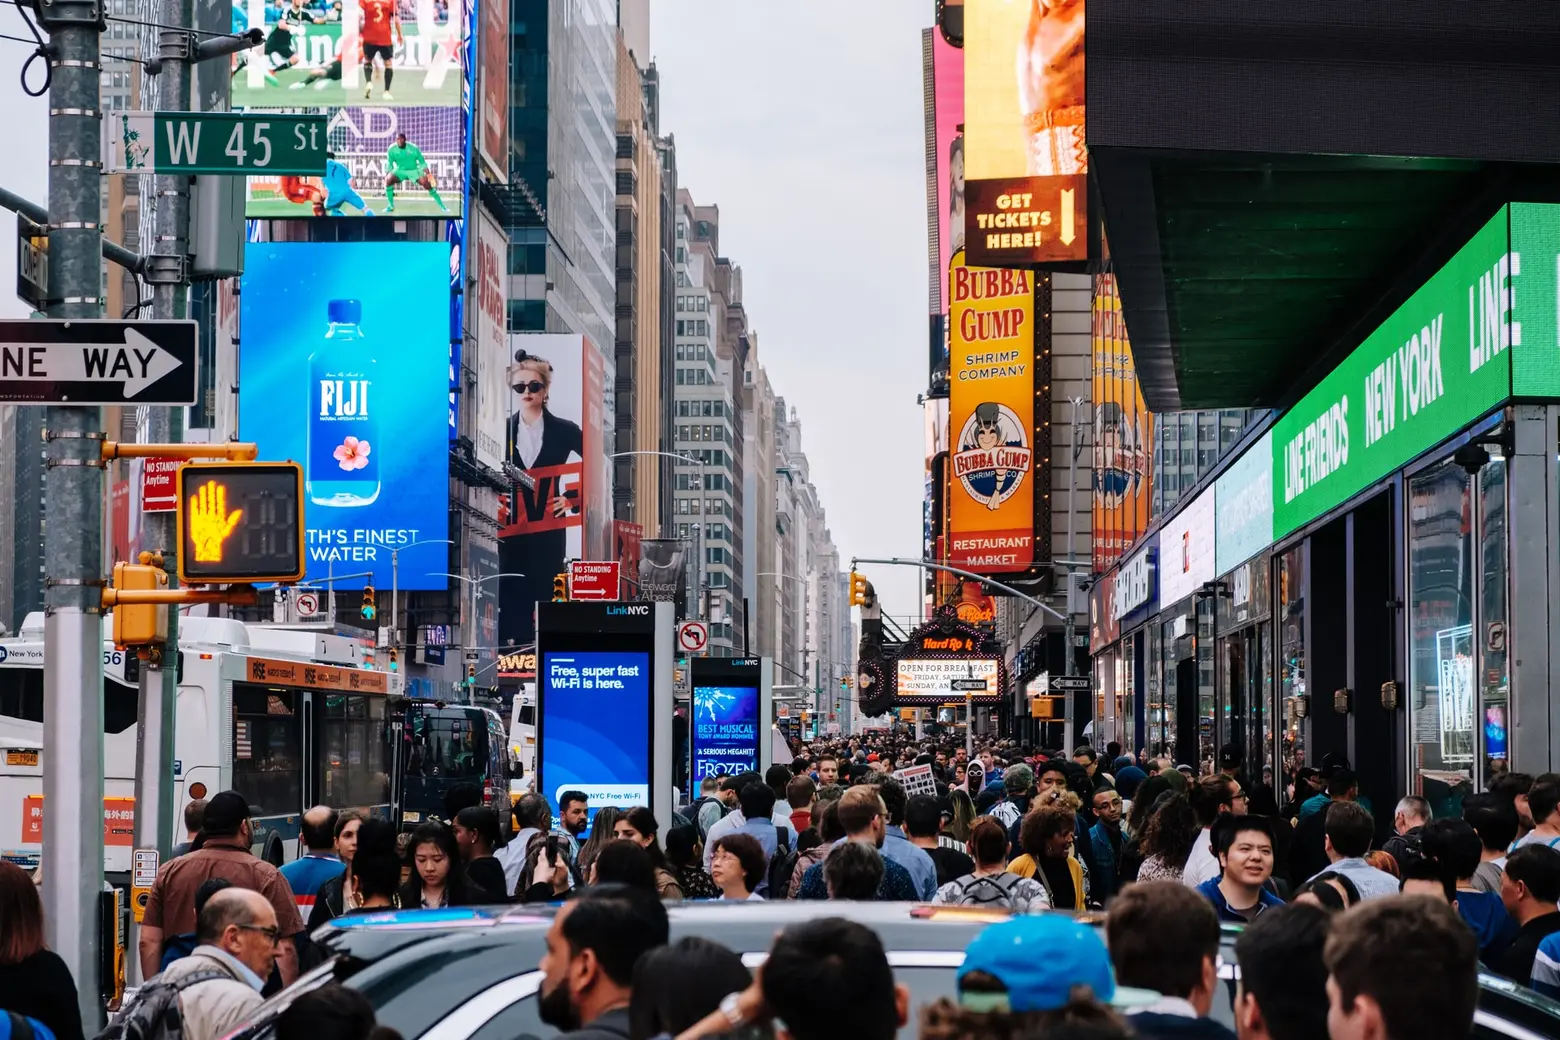 New York City projected to see 70% increase in tourism in 2022